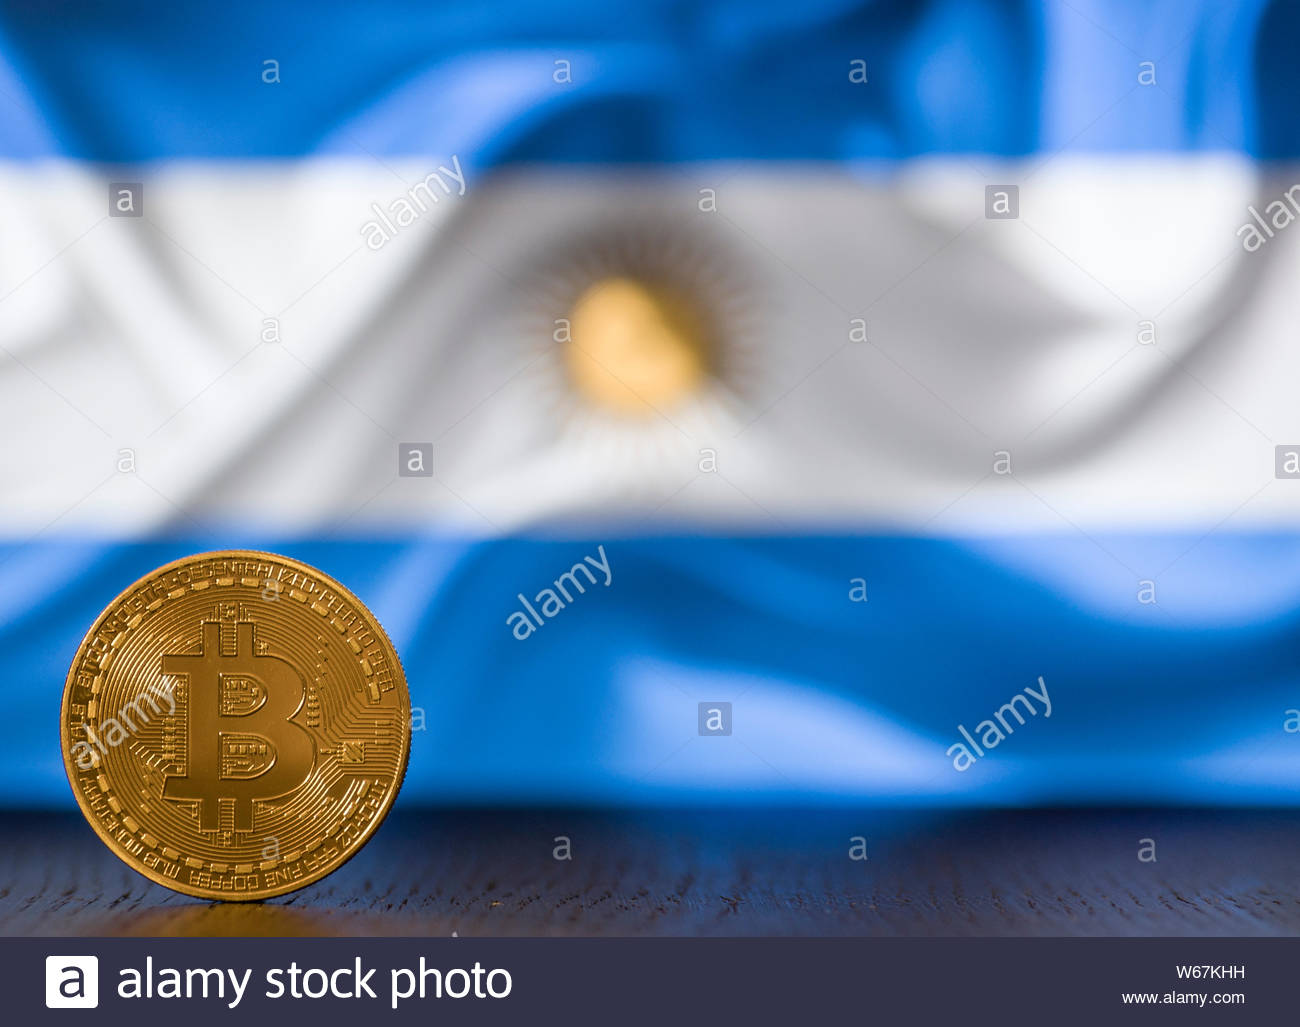 Bitcoin Golden Coin With Argentina Flag On Background Stock Photo